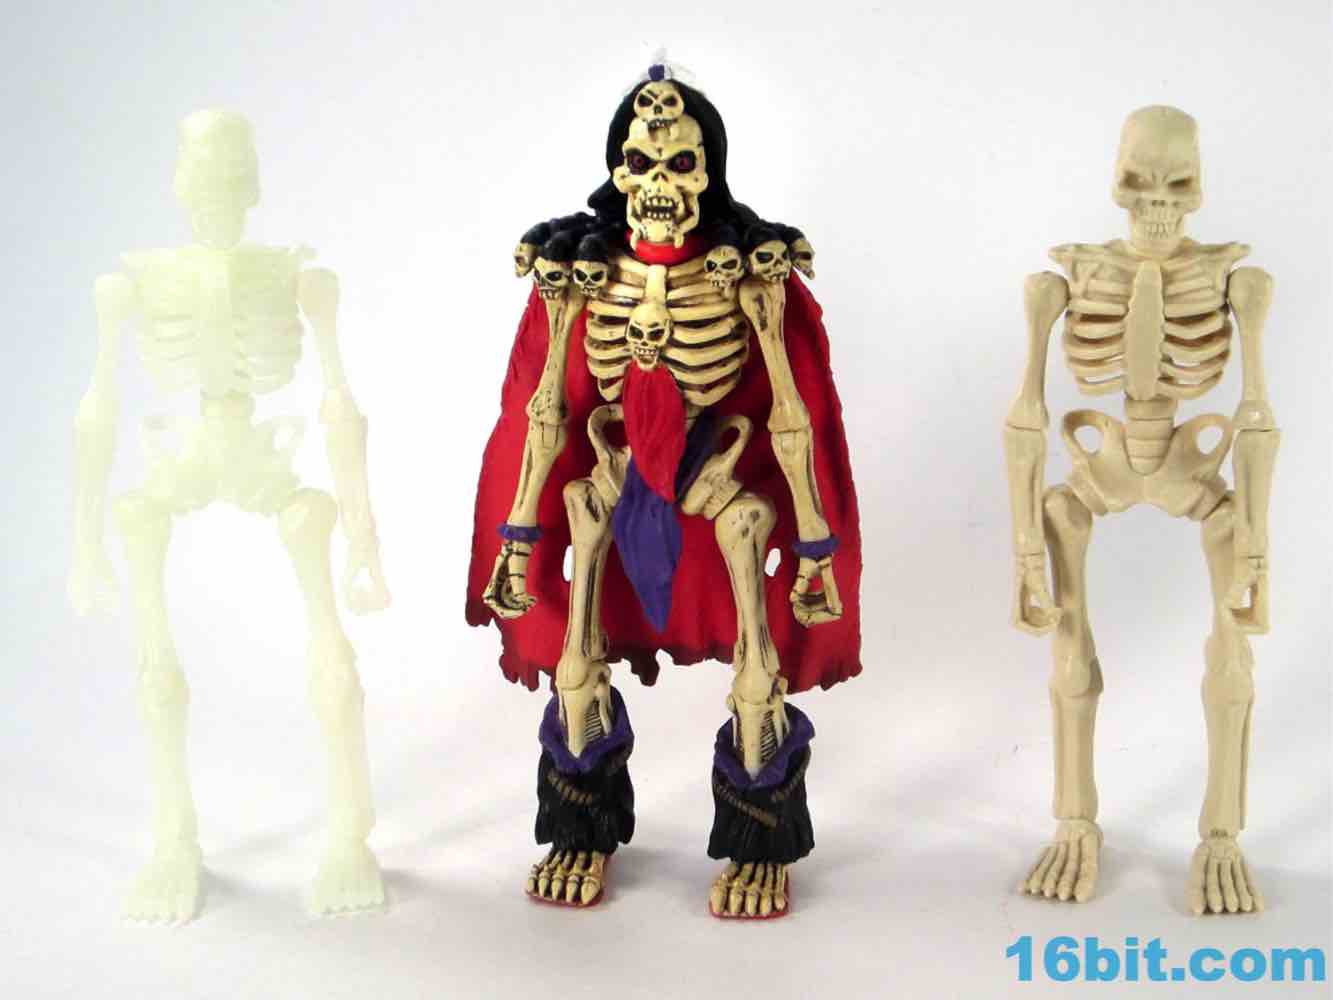 Figure of the Day Review: October Toys Skeleton Warriors